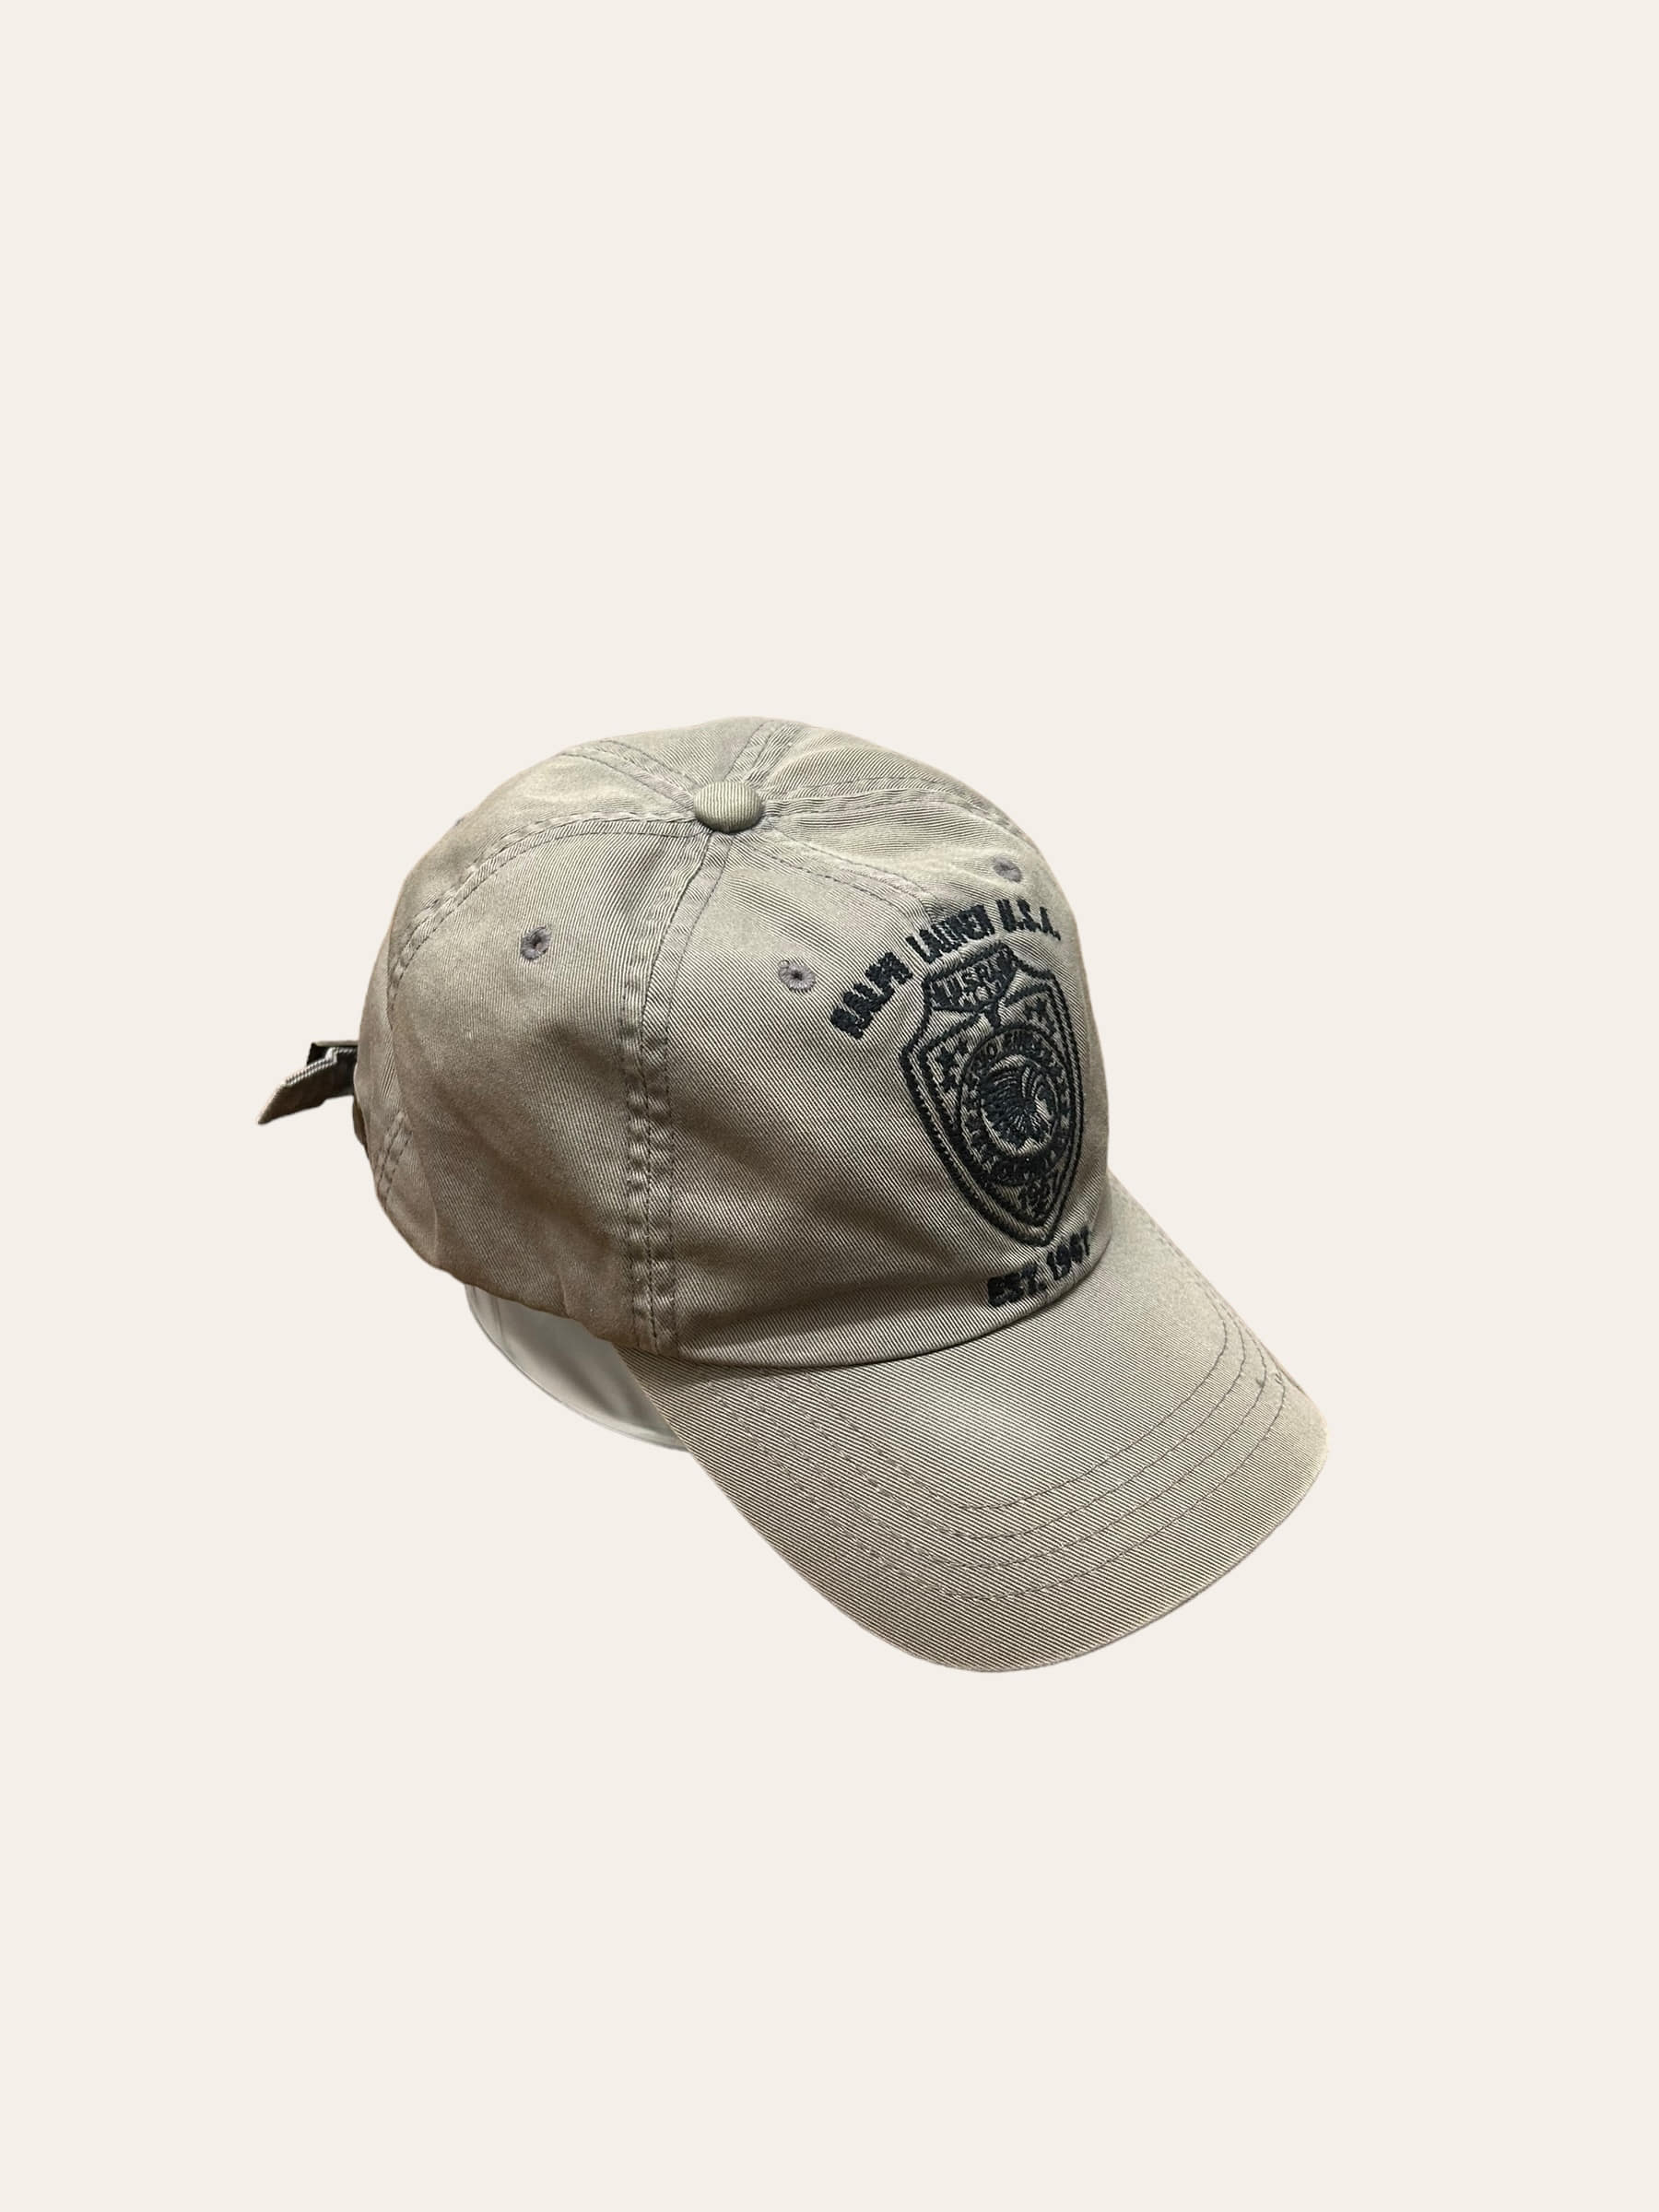 Polo ralph lauren 90&#039;s gray color embroidered cap